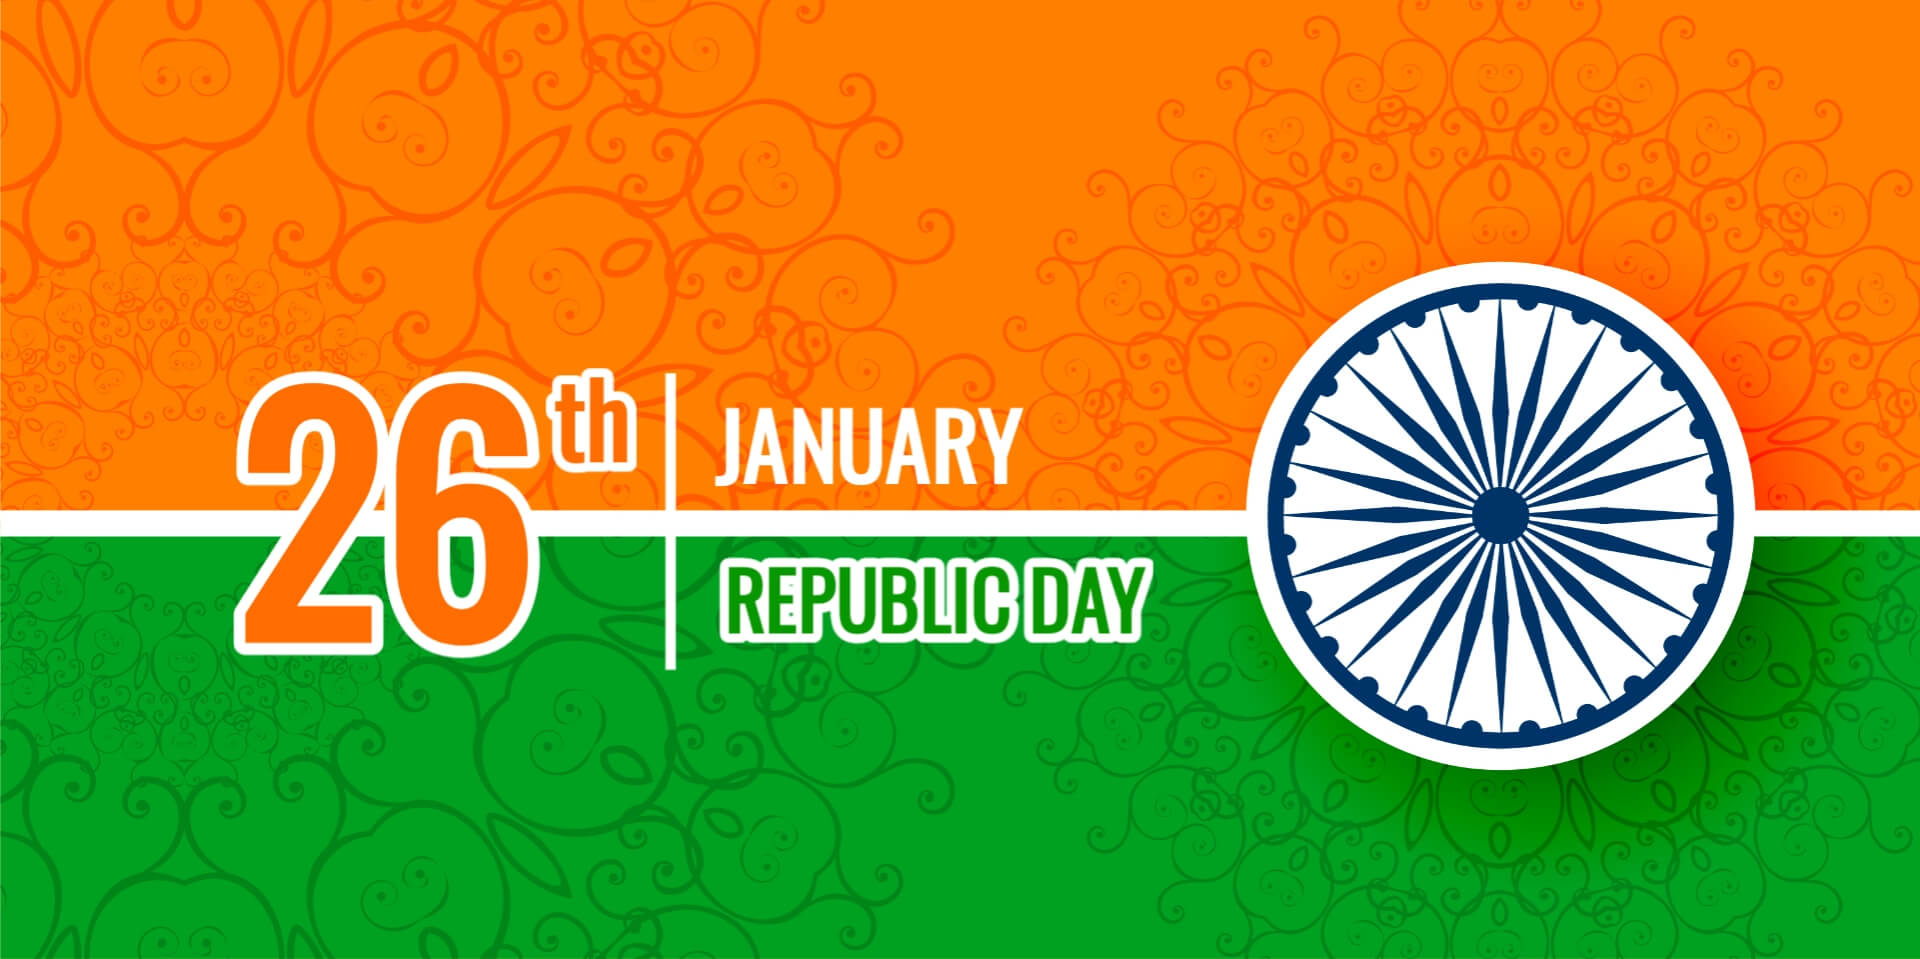 100+ BEST Happy Republic Day Images, Photos & Pictures 2022